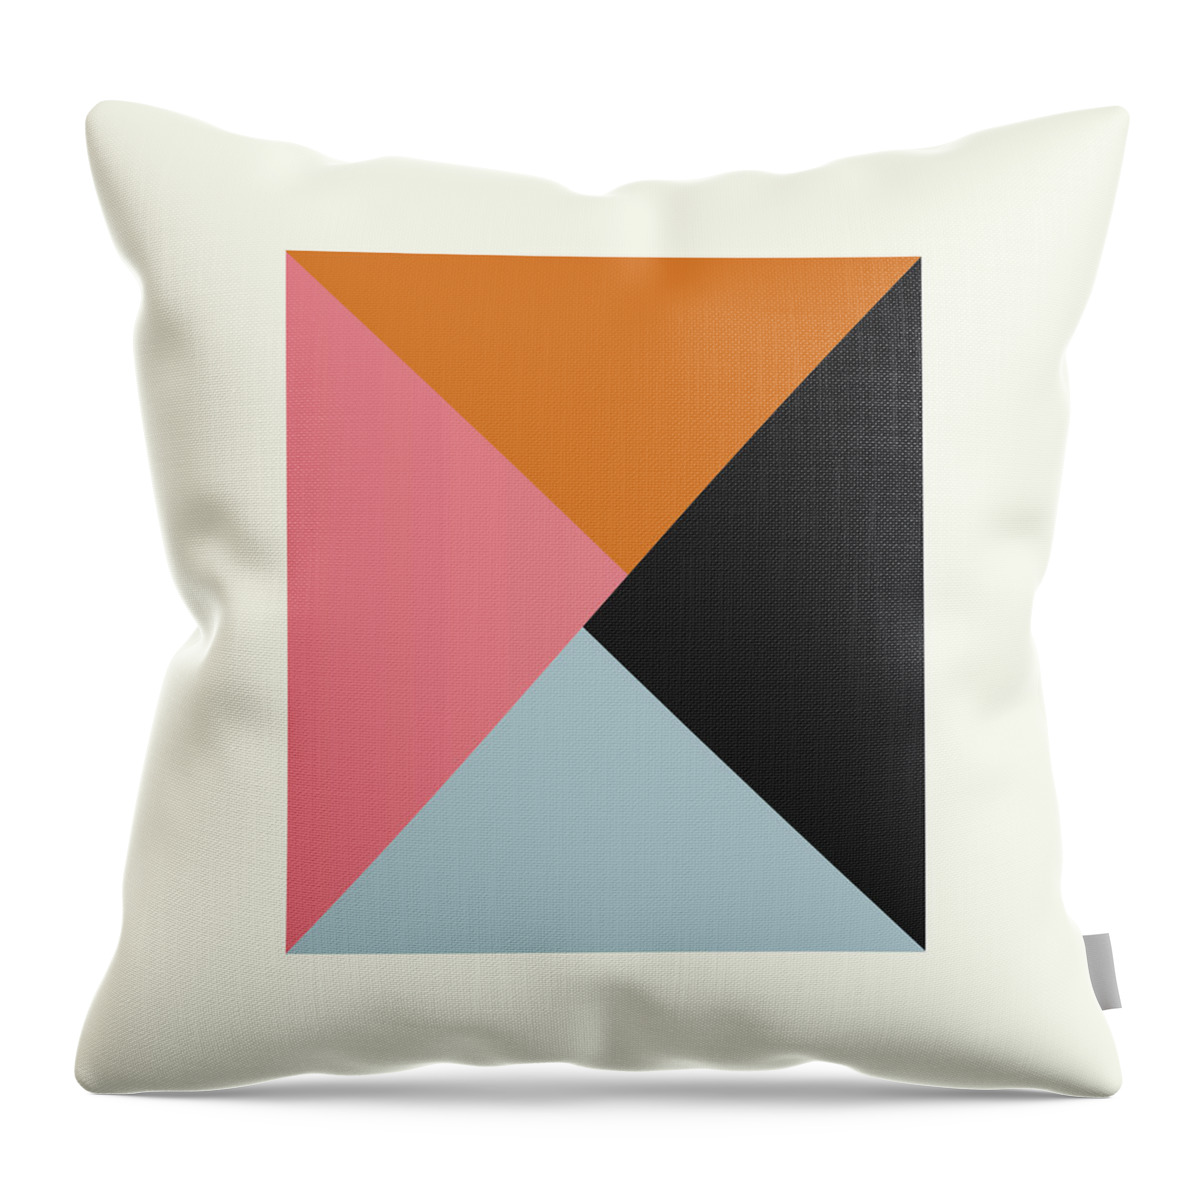 Burnt Orange Throw Pillow featuring the digital art Together, We Will by Ultra Pop